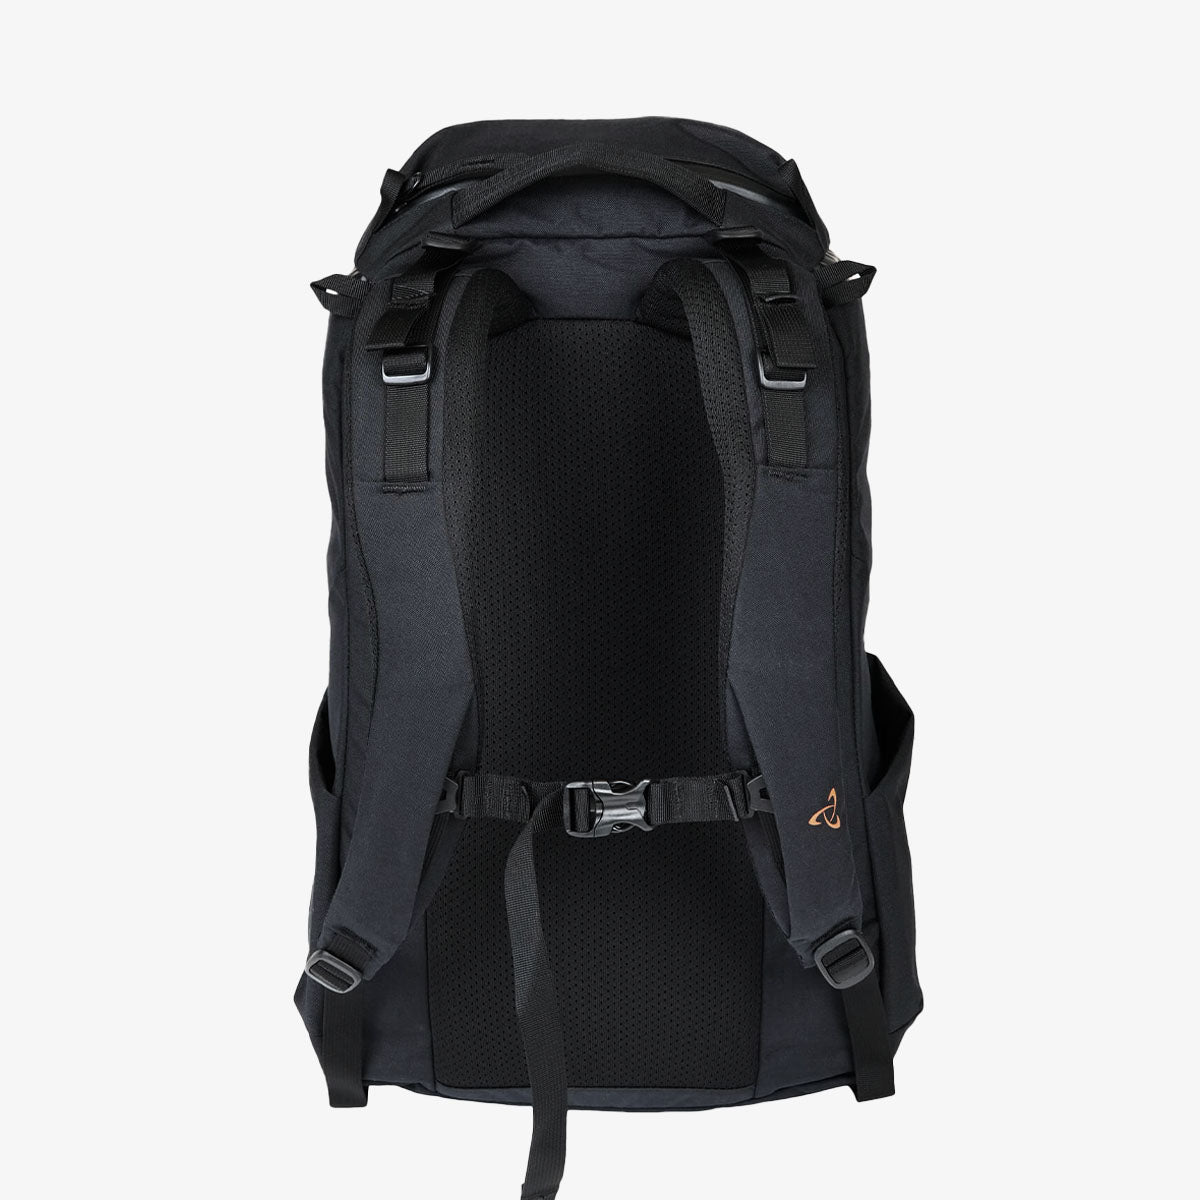 Mystery Ranch Catalyst 22 Backpack